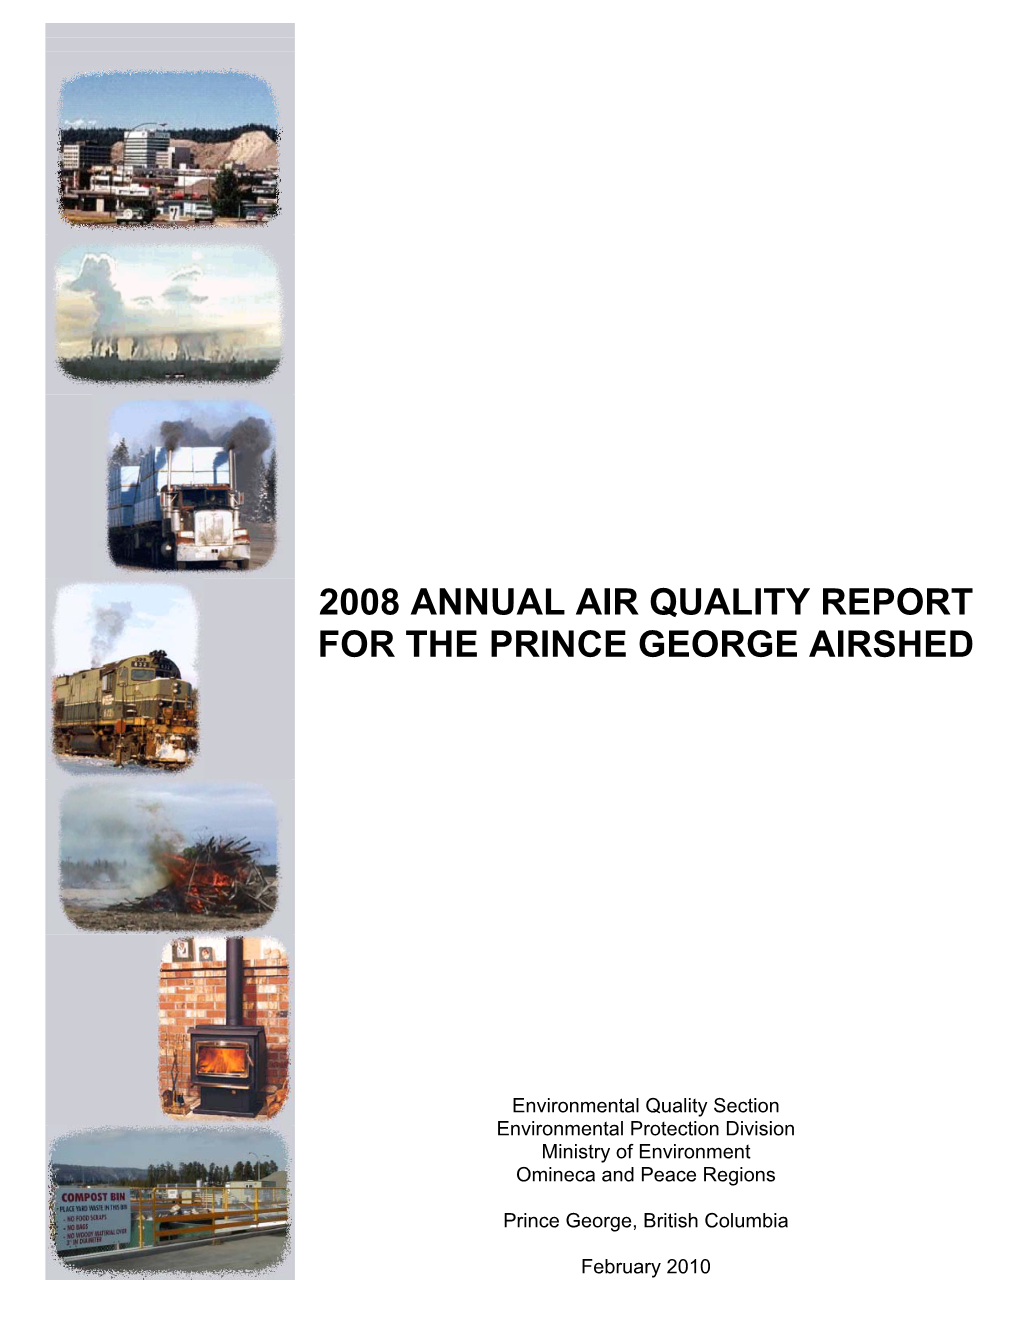 2008 Annual Air Quality Report for the Prince George Airshed